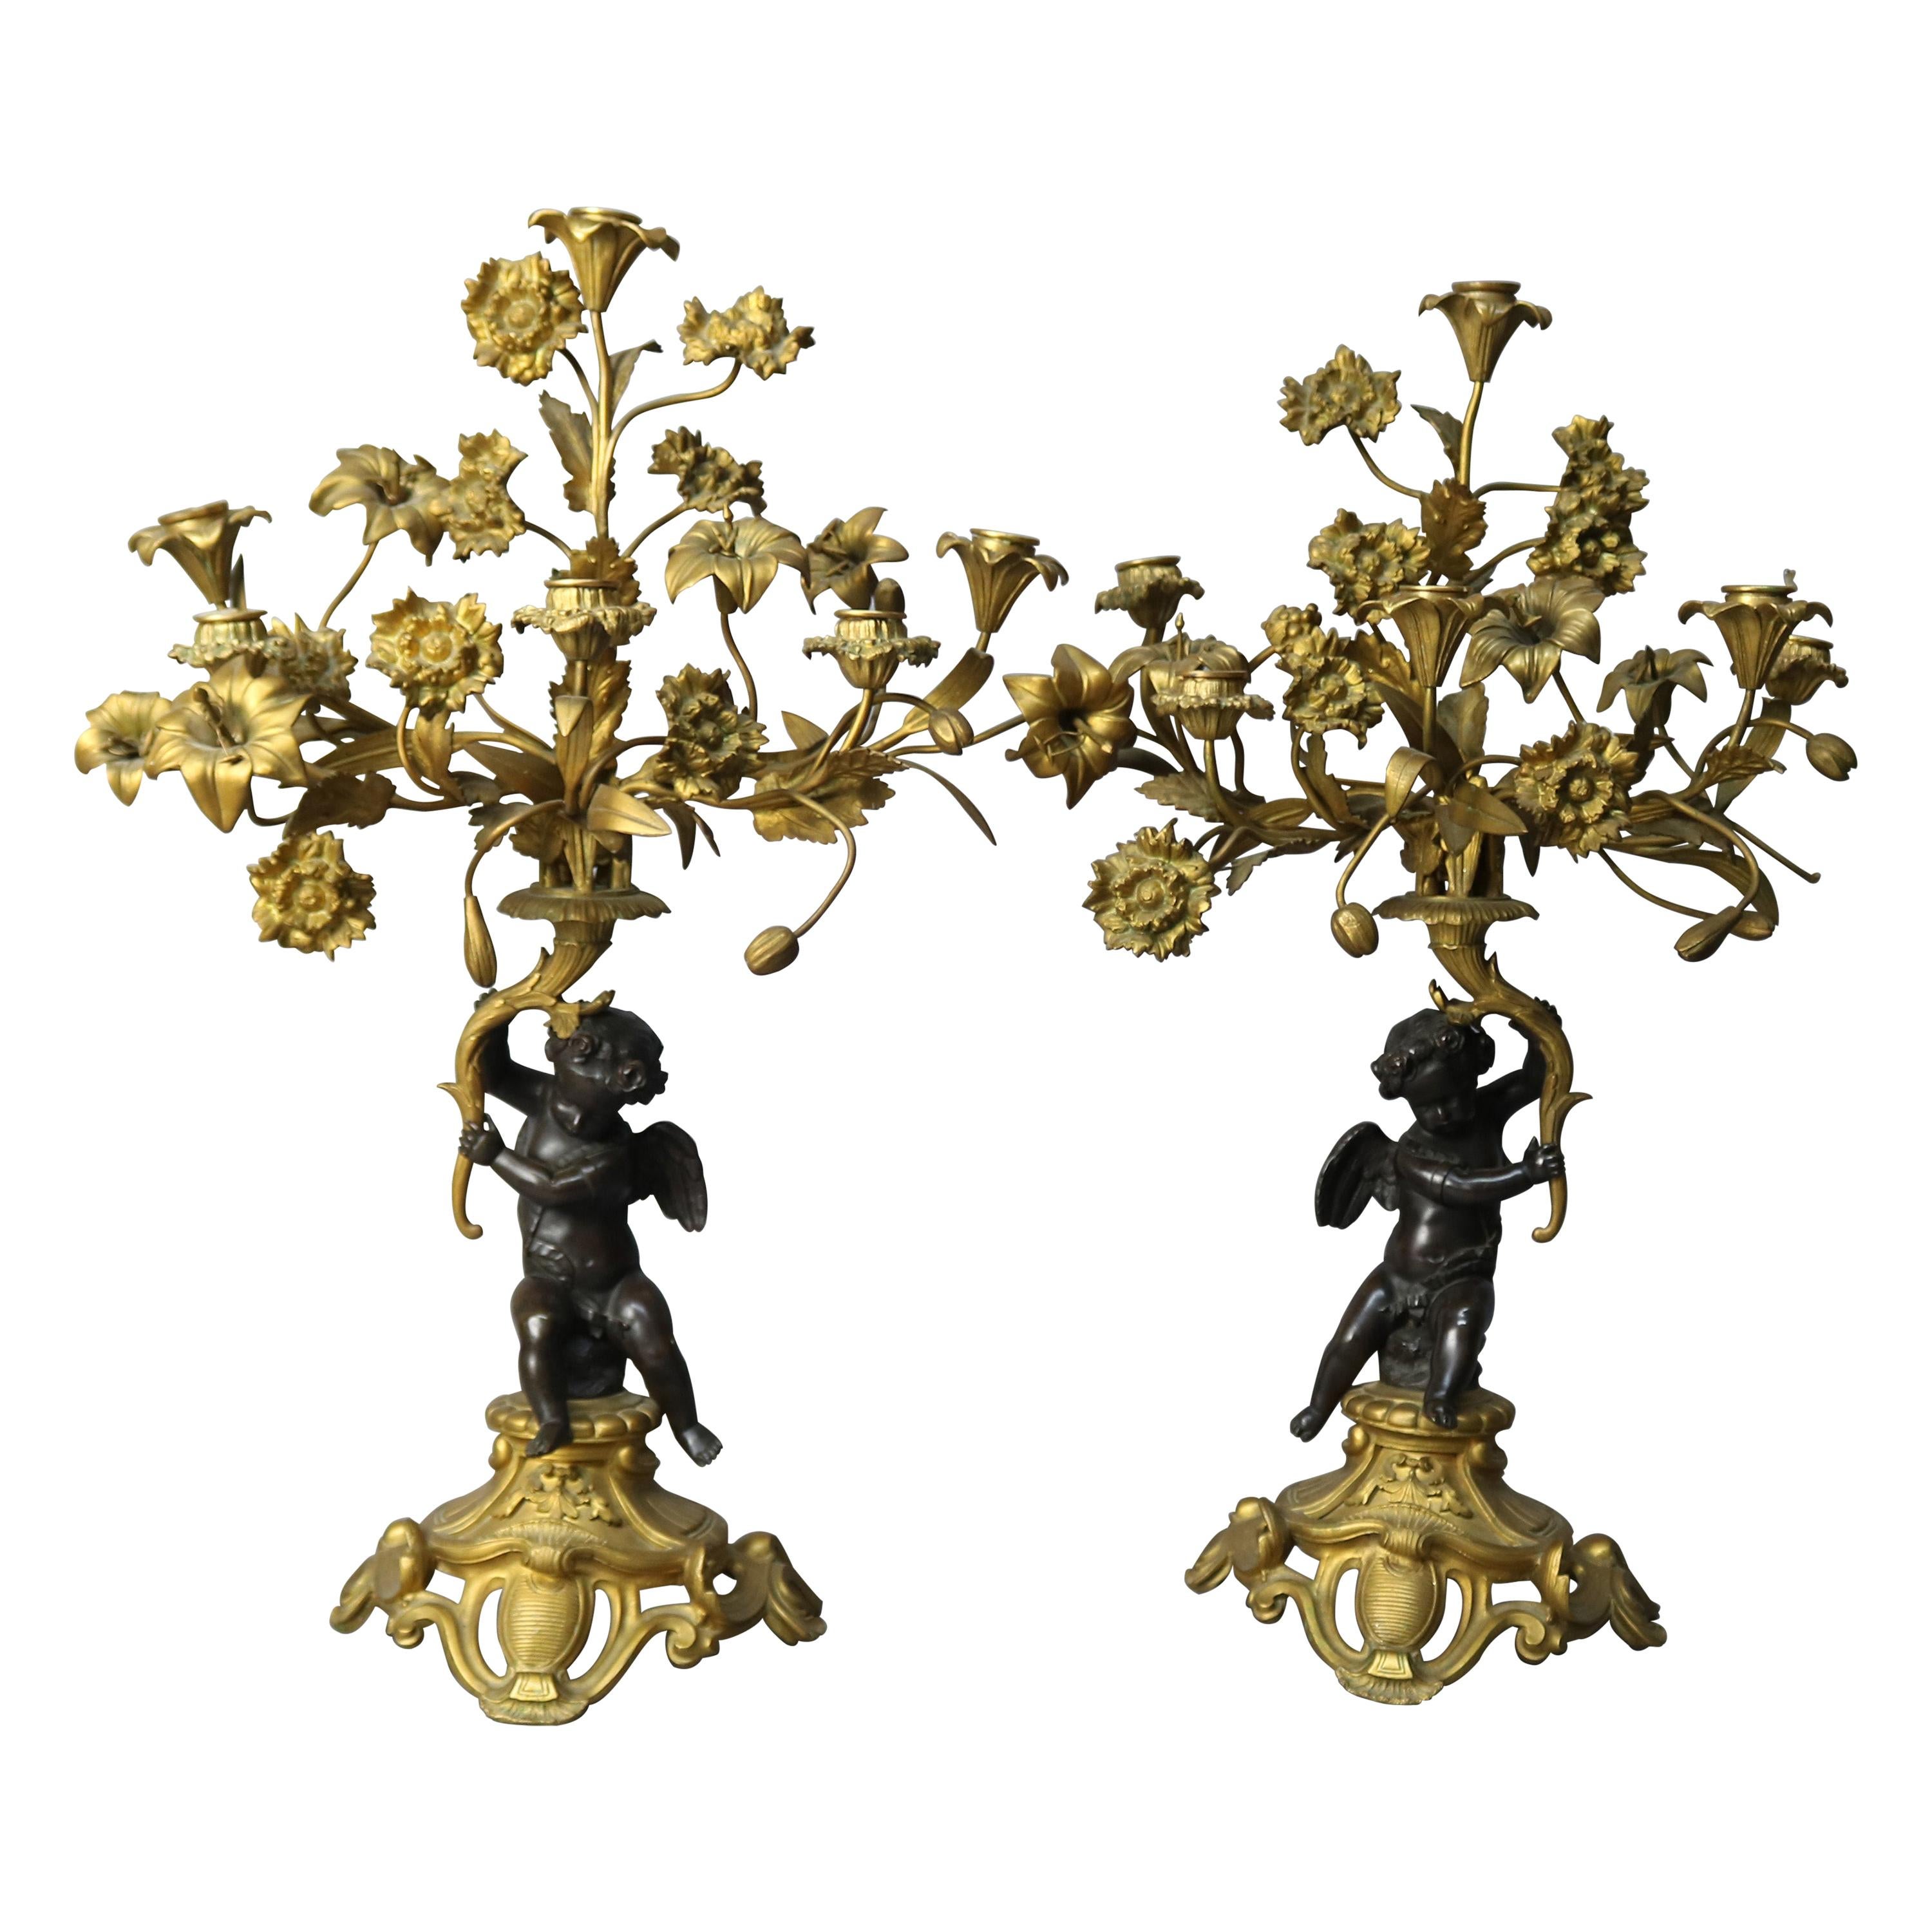 Pair of French Rococo Figural and Floral Parcel-Gilt Candelabra, 19th Century